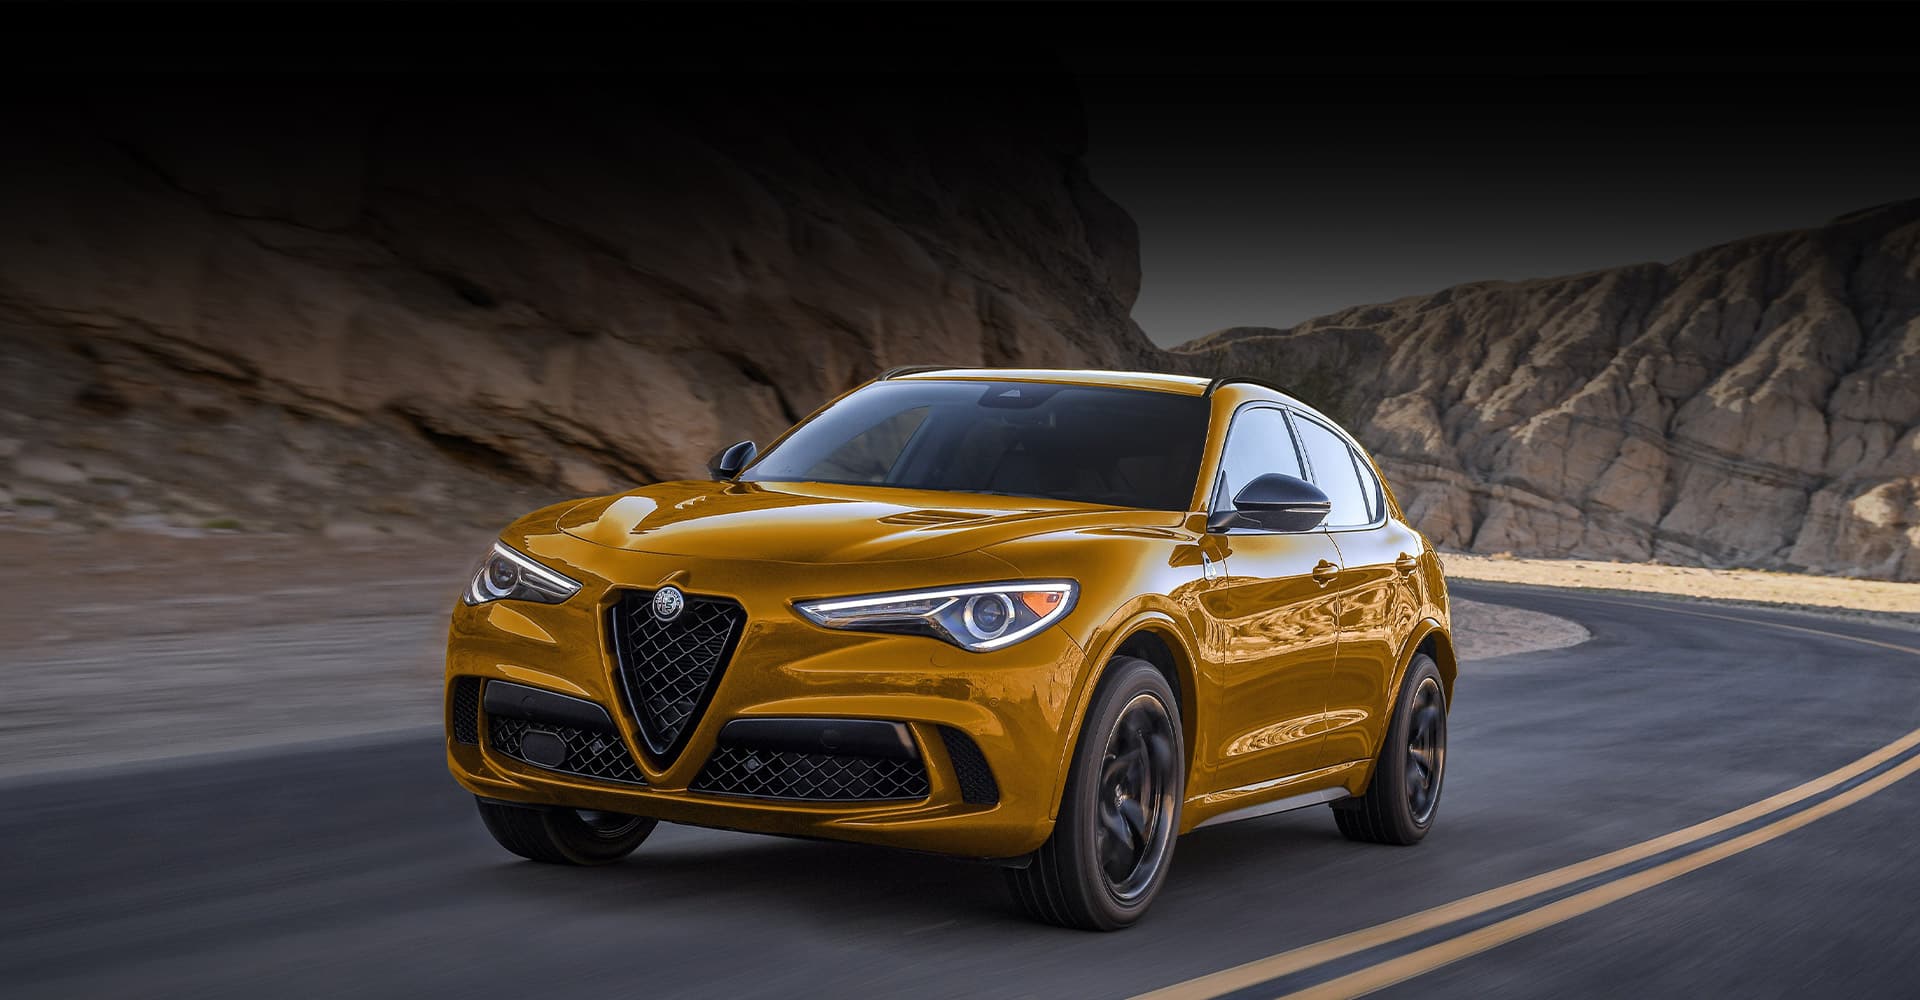 A gold 2022 Alfa Romeo Stelvio Quadrifoglio taking a curve at dusk, with jagged rock formations on both sides of the road.